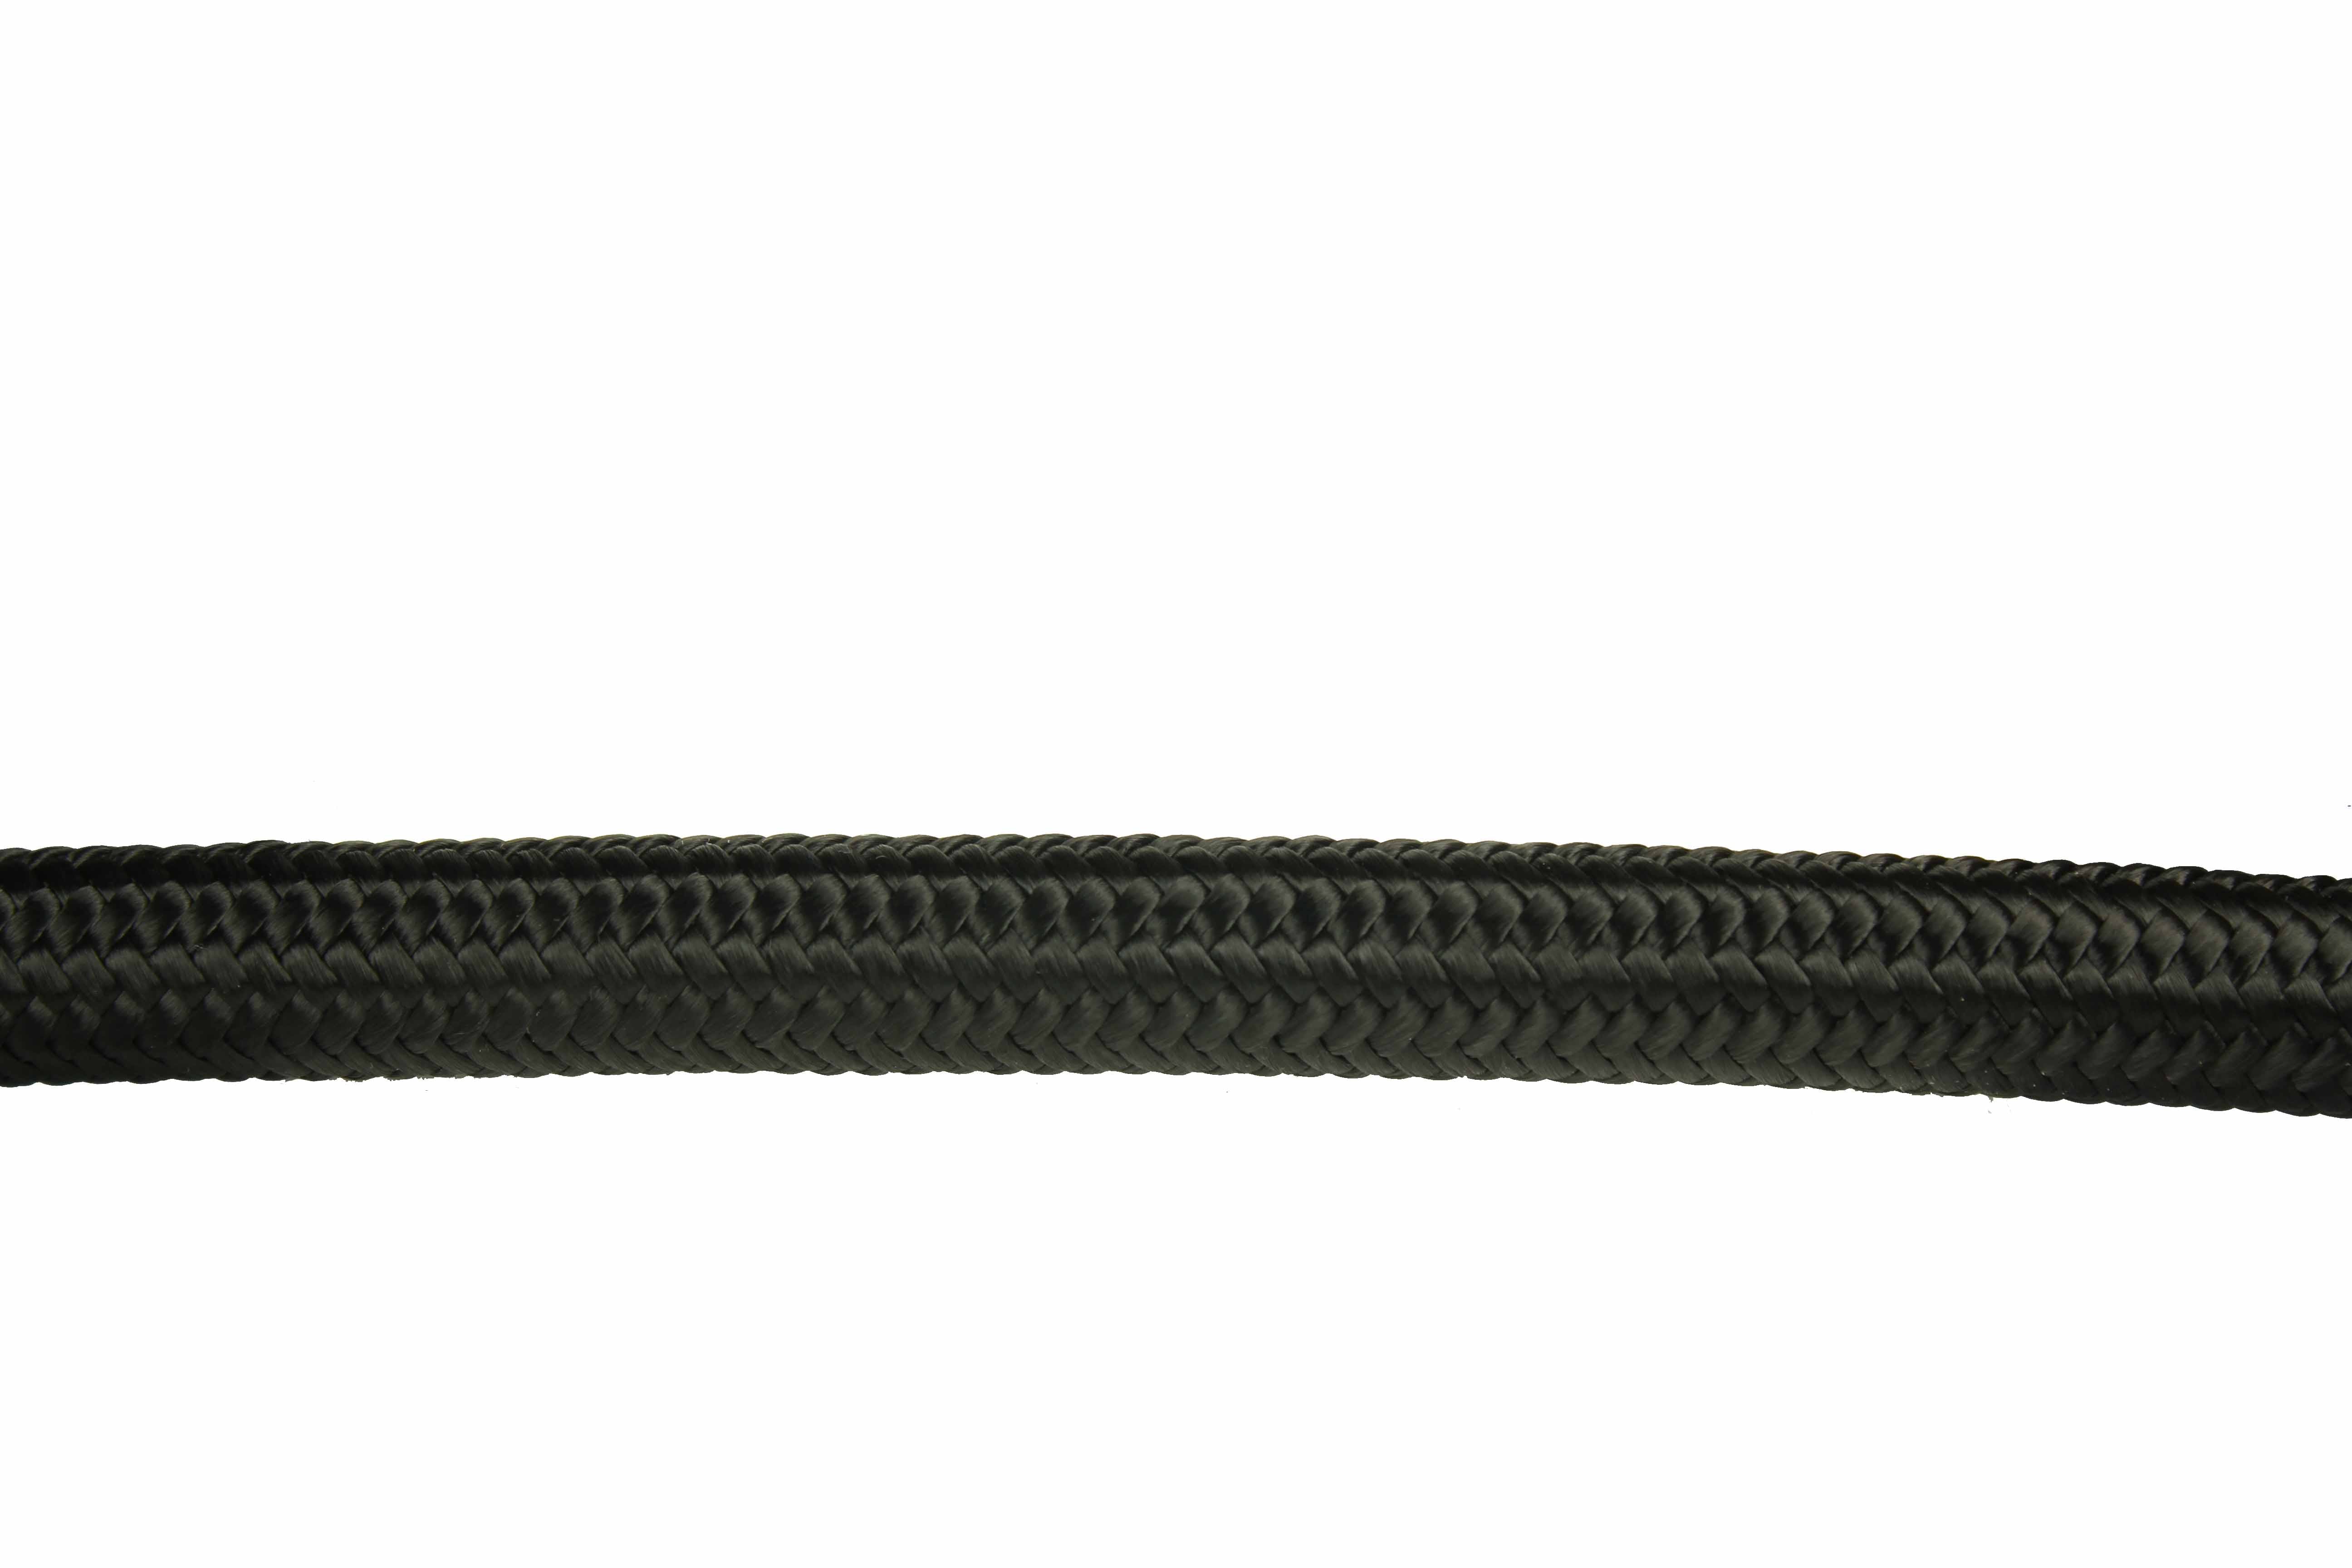 Redhorse Performance 230-10-20 -10 ProSeries Black 230 stainless core hose - 20 feet